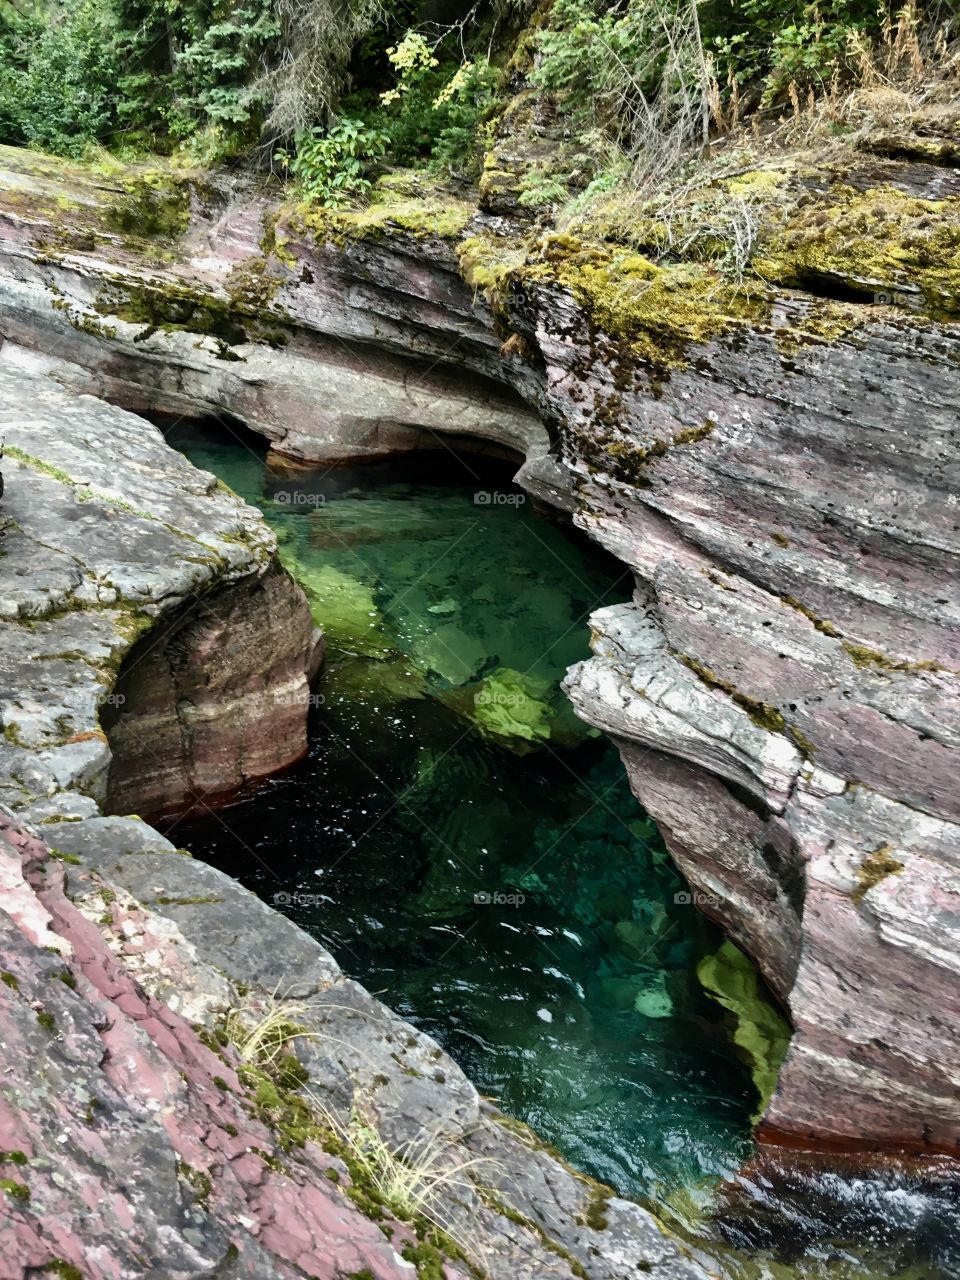 Photo shot in glacier national park in Montana. The water between the two rocks created a gorgeous stream. The water paved its way through the mountain. The color of the rocks gave the water a beautiful green color. 